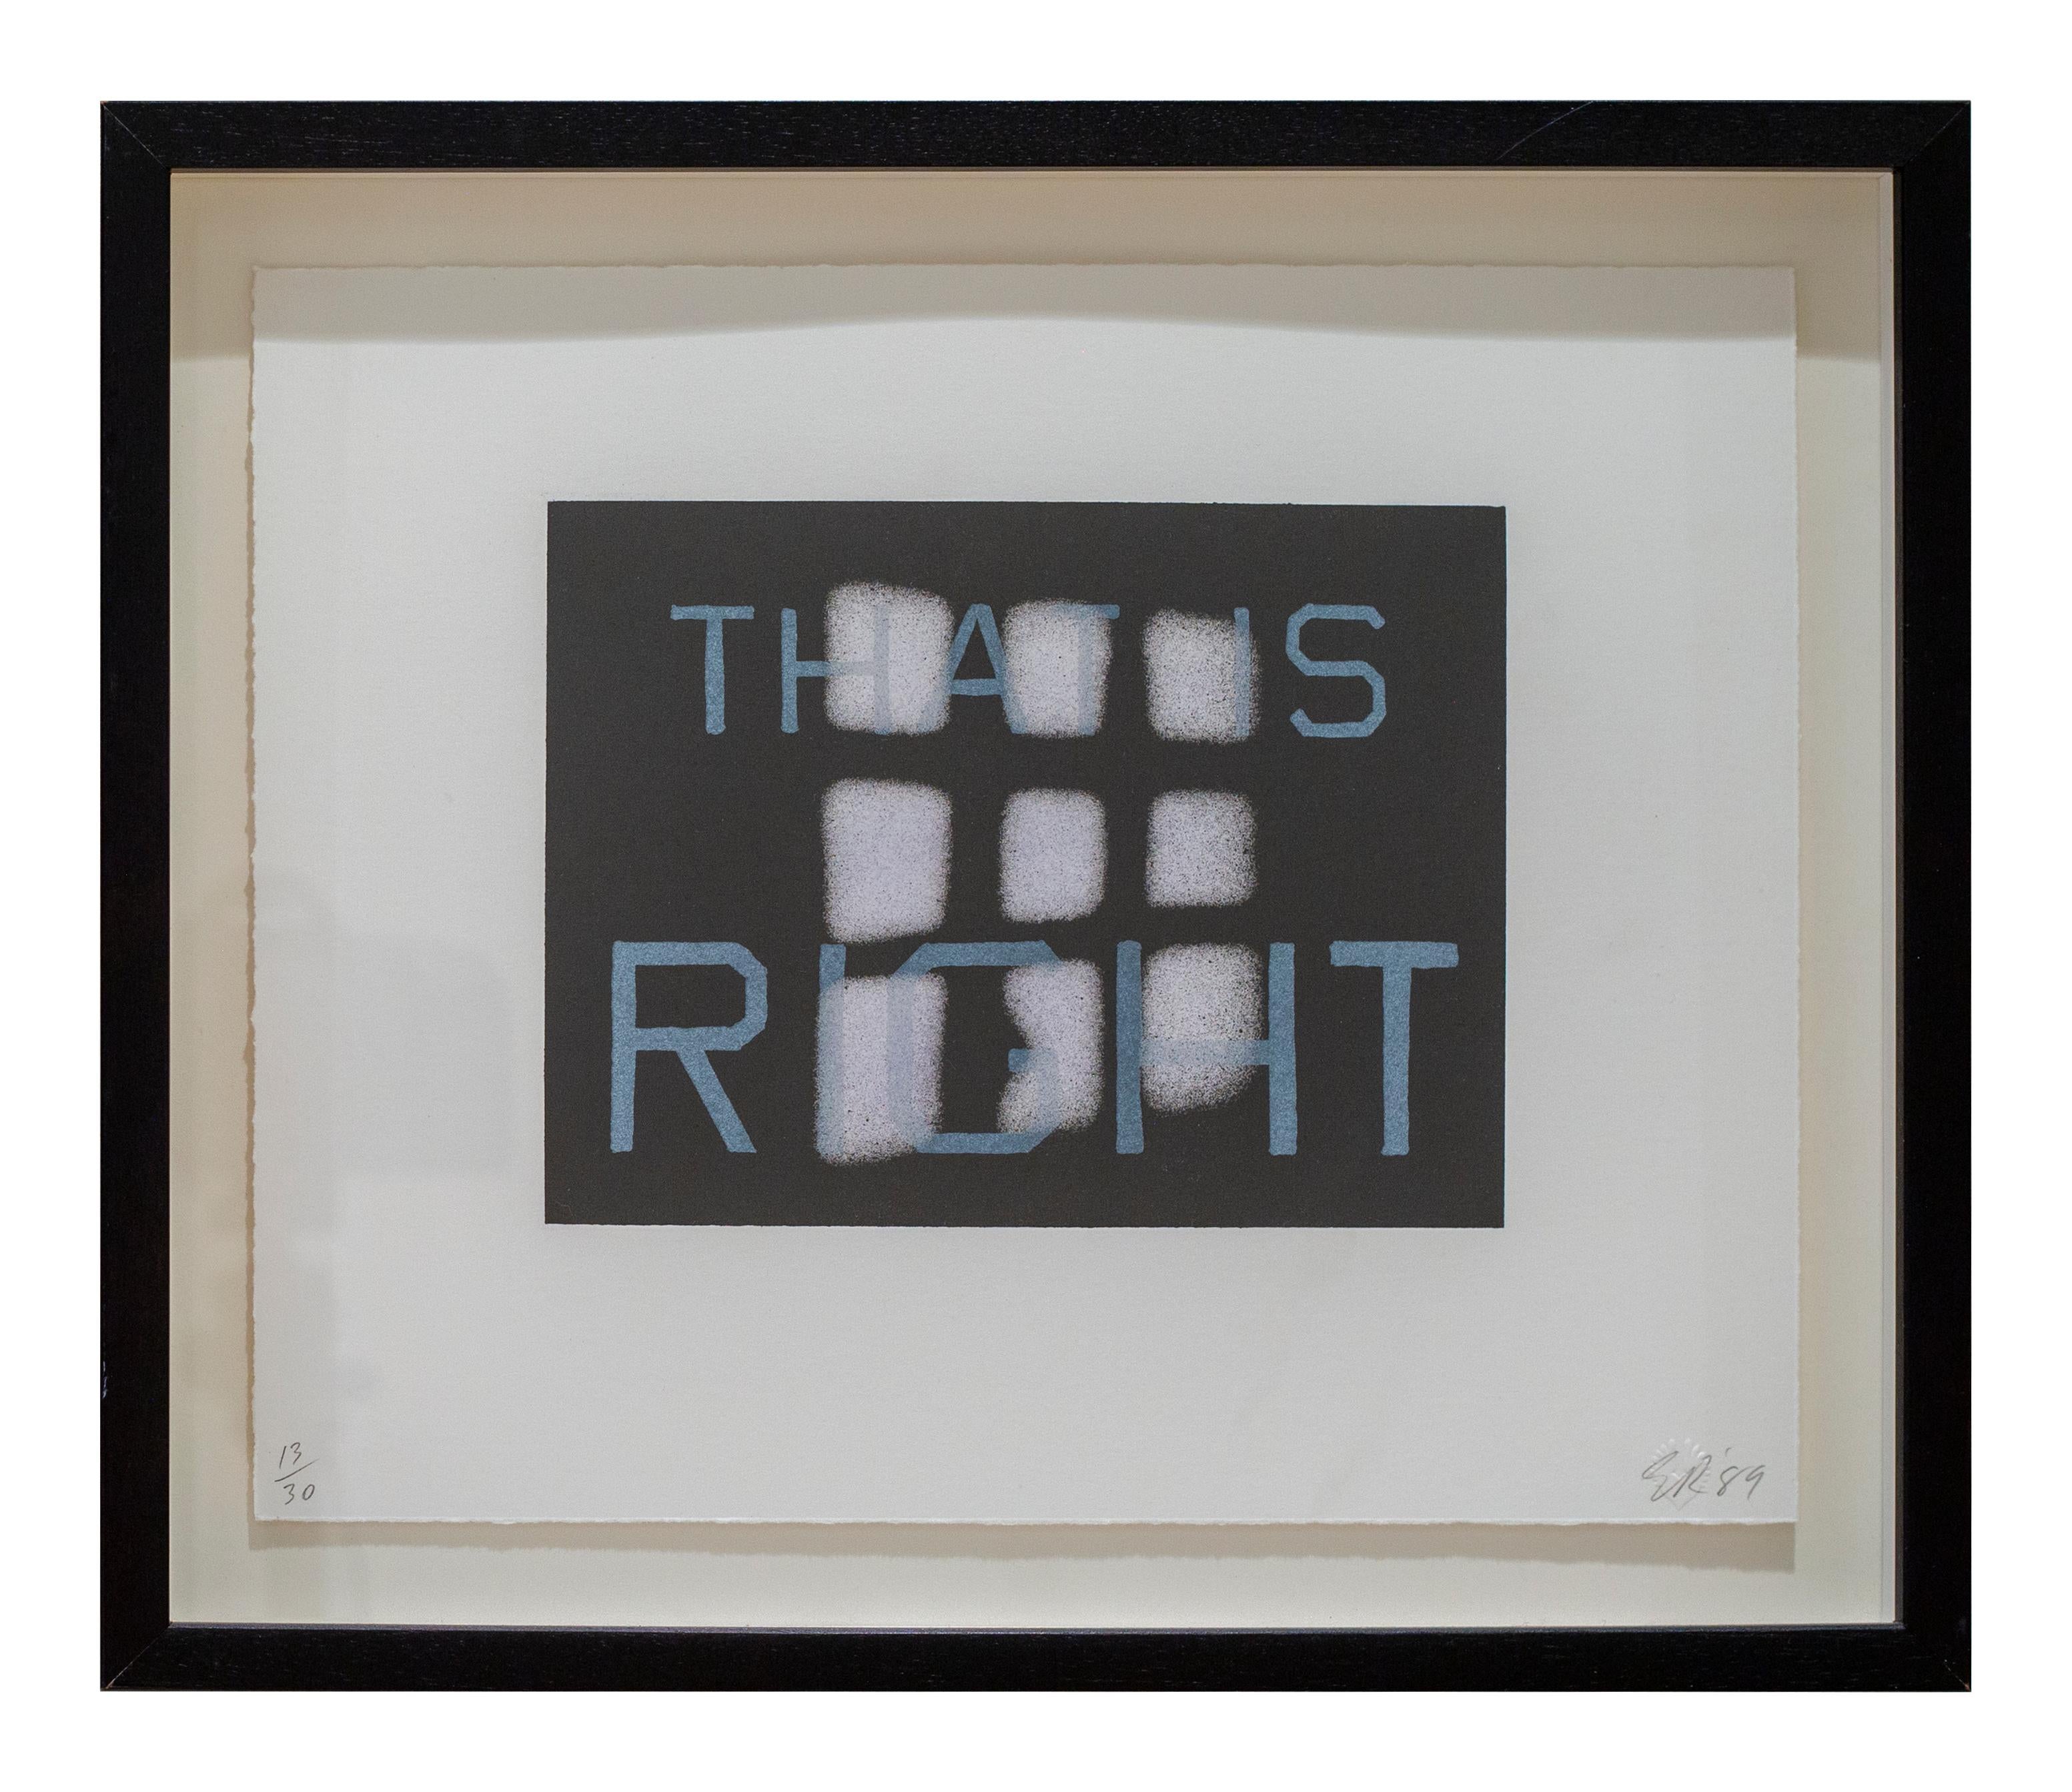 That is Right  - Print by Ed Ruscha